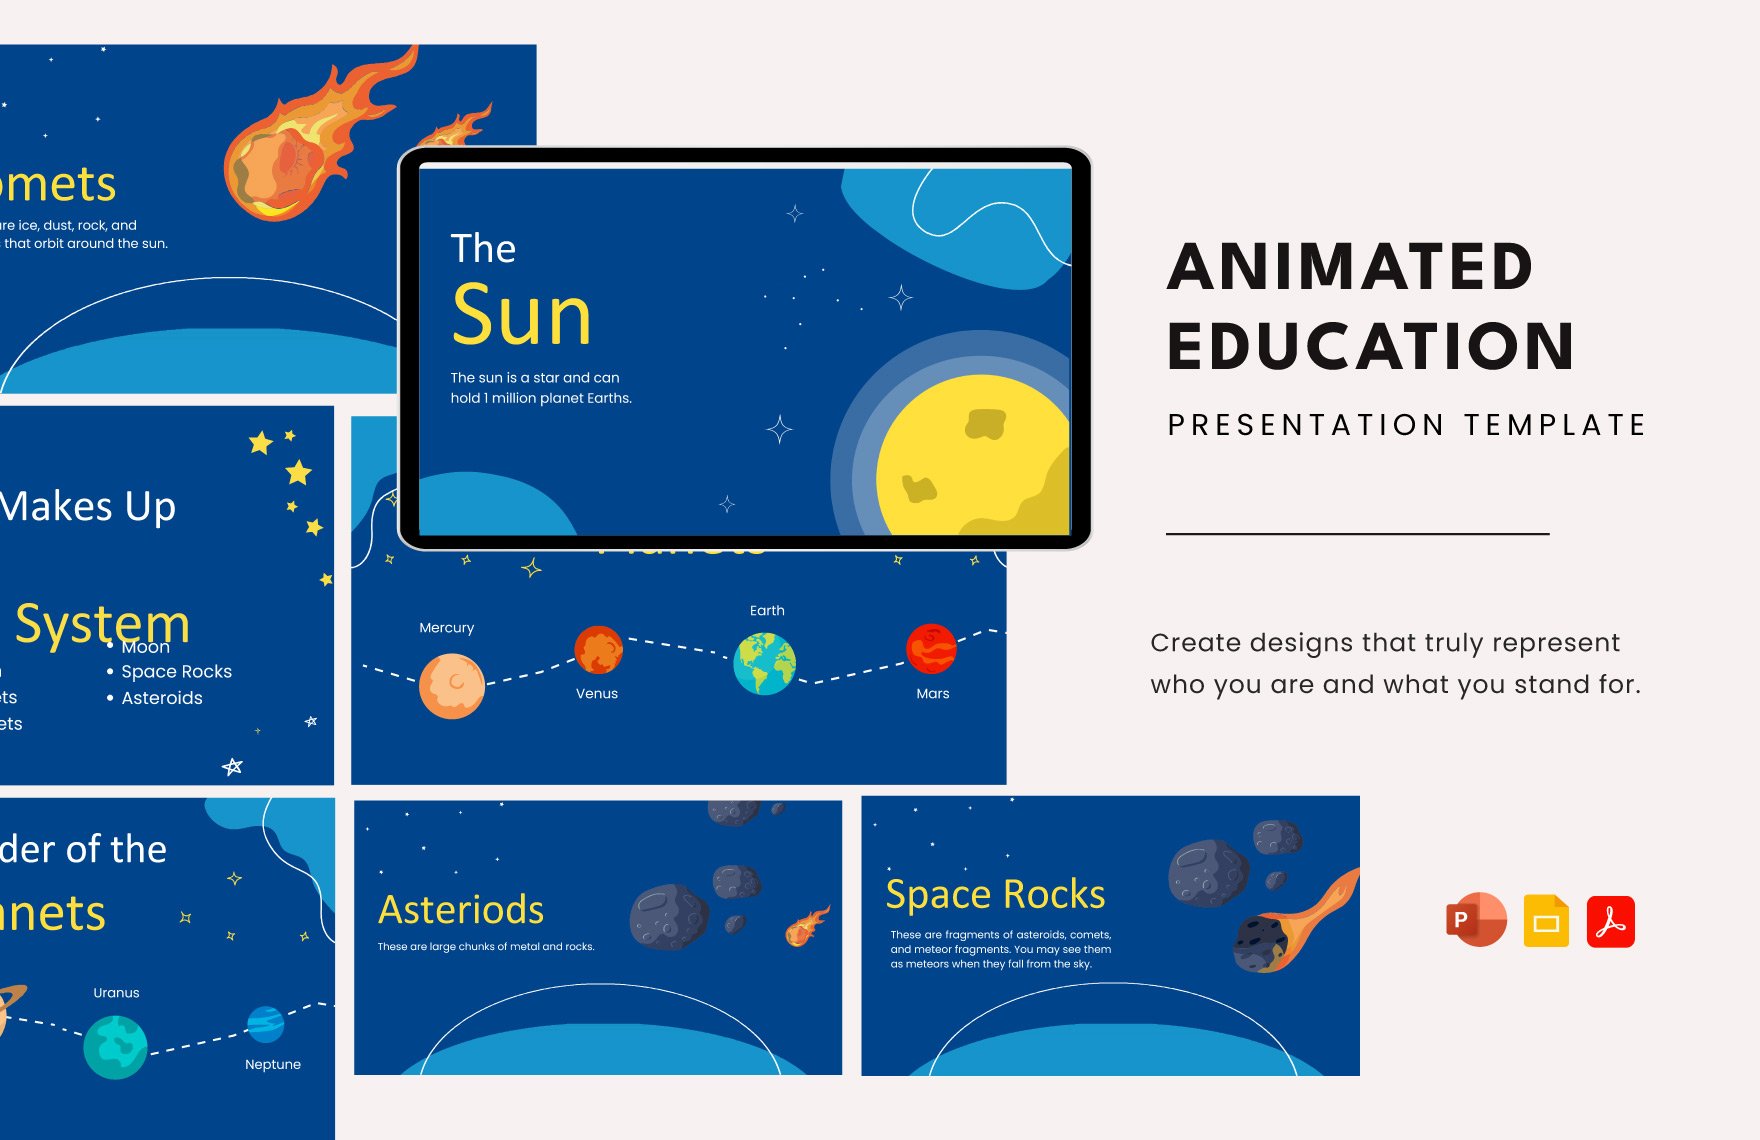 Animated Education Template